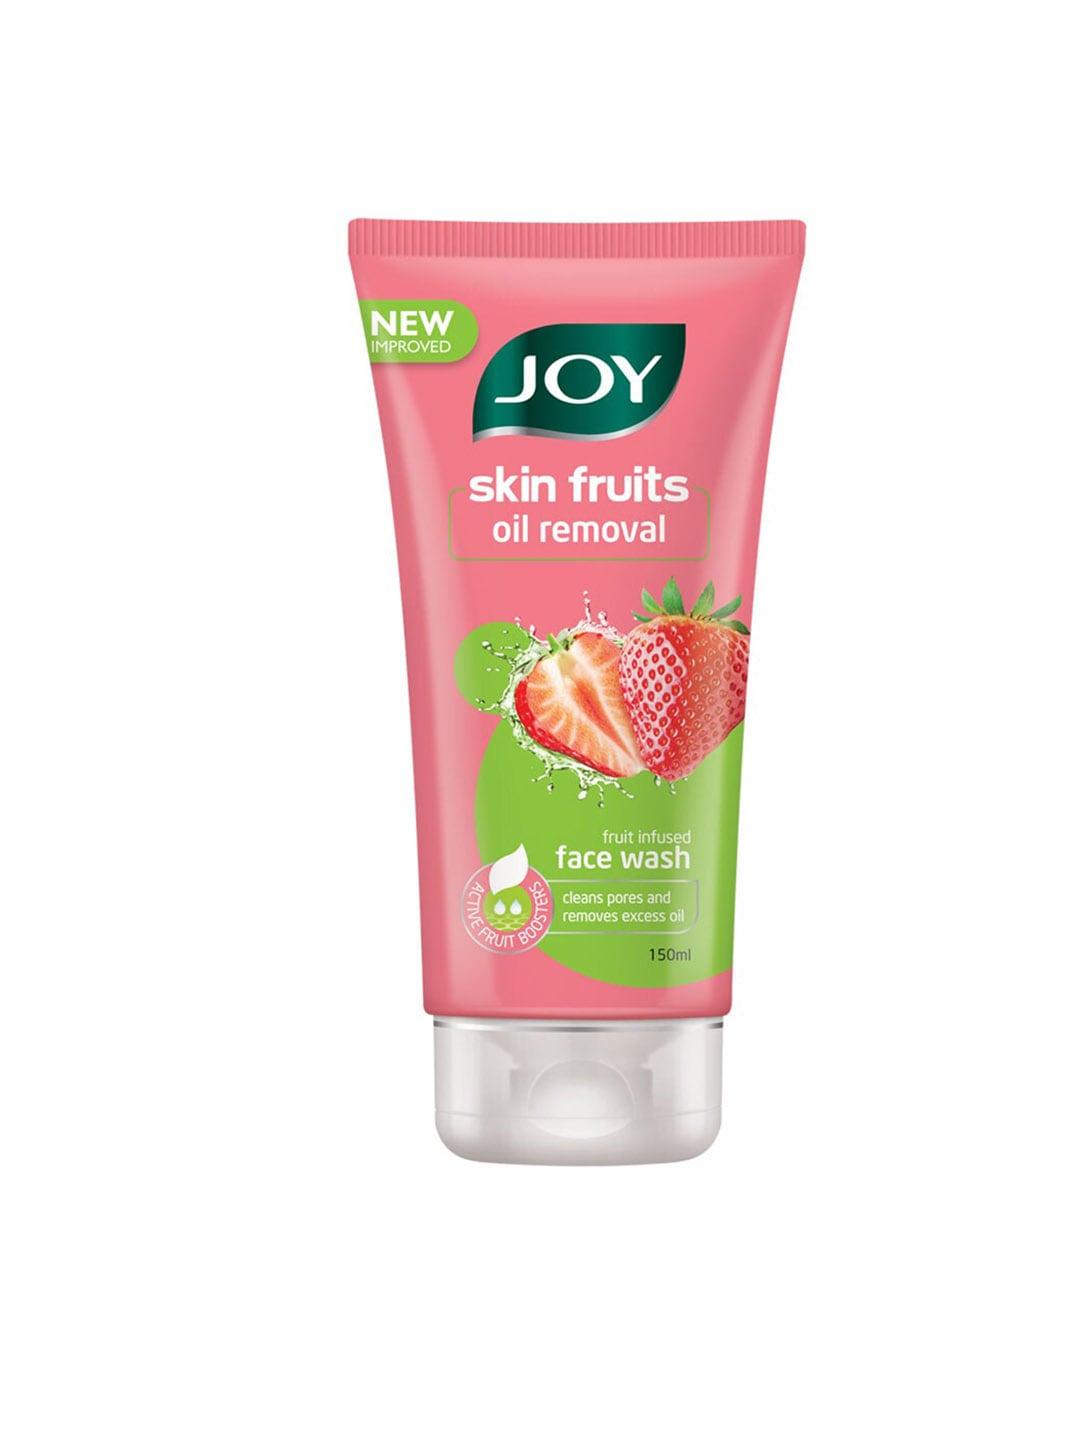 JOY Skin Fruits Oil Removal Strawberry Face Wash for Acne & Pore Care - 150ml